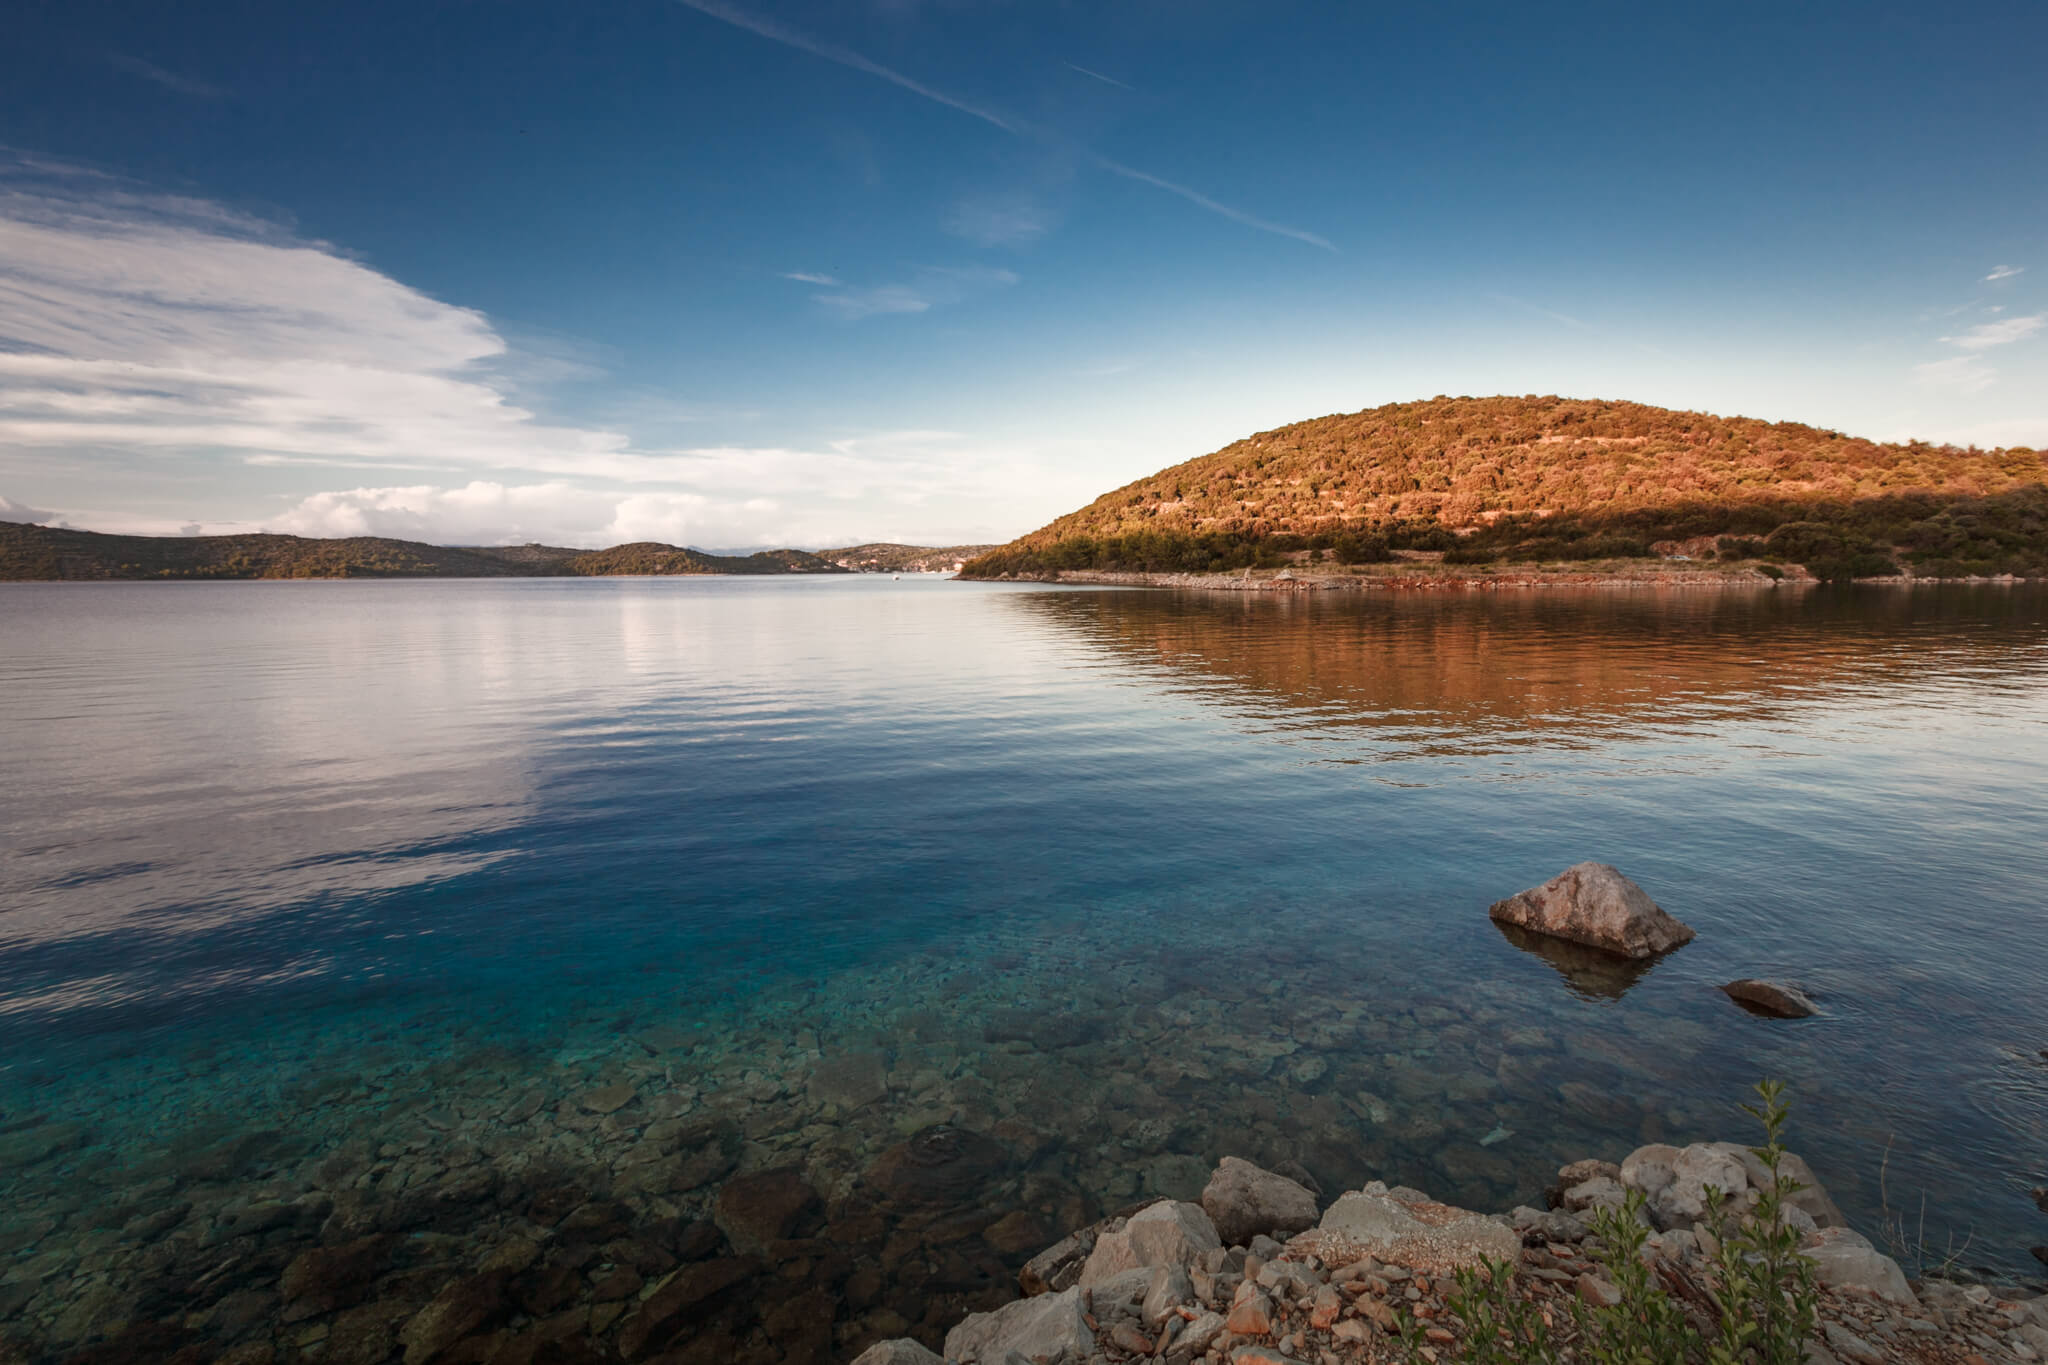 Long Island or Dugi Otok – Island made for relaxation and enjoyment